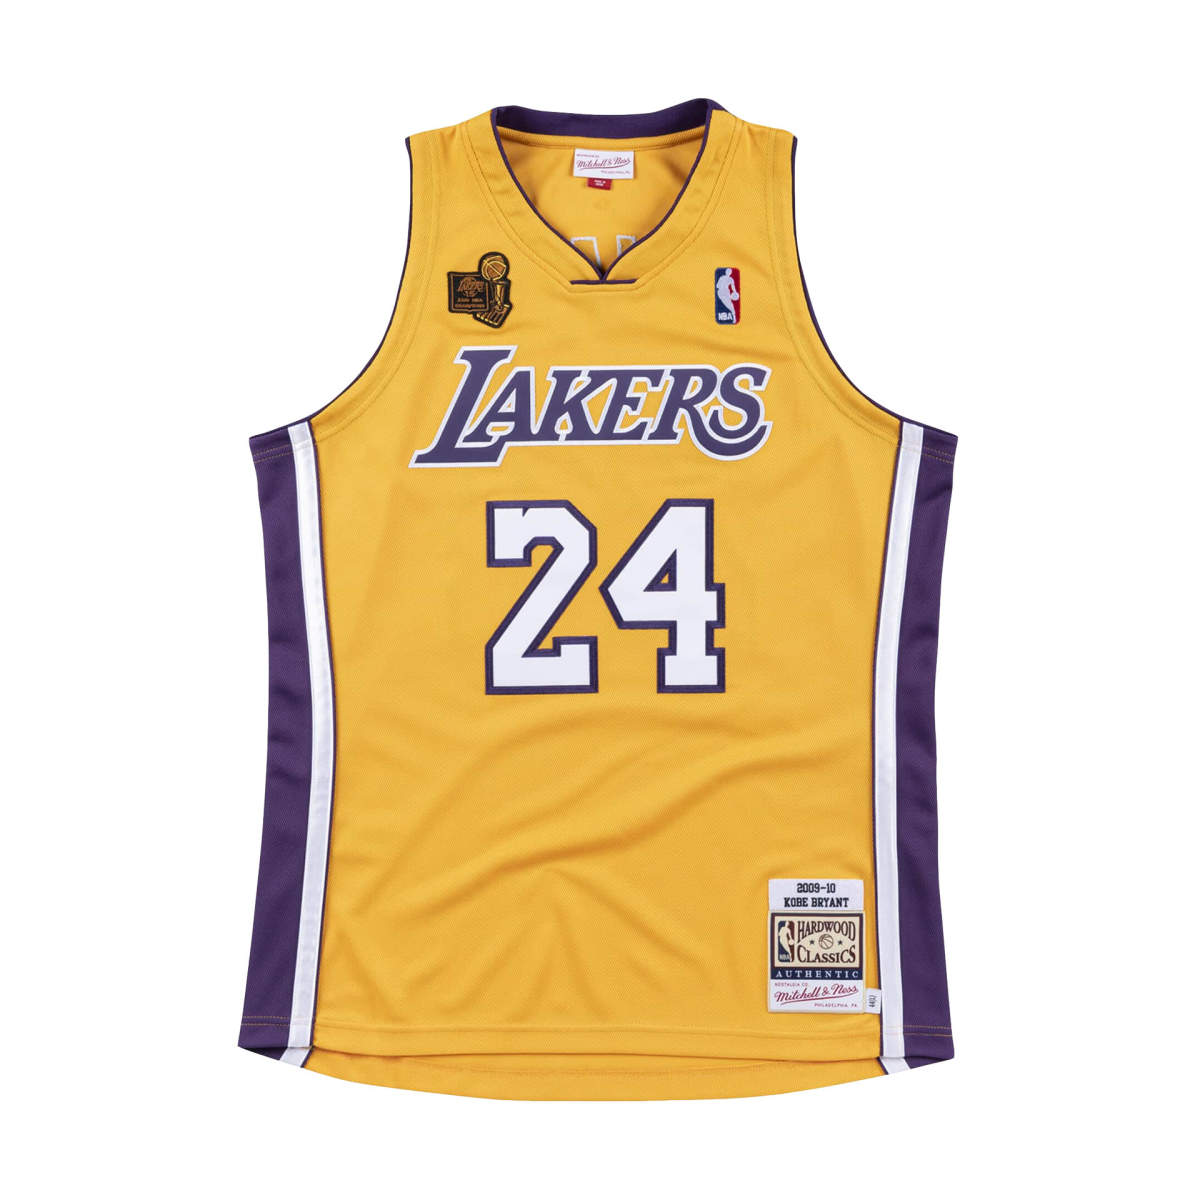 Los angeles lakers away authentic jersey 2009-10 bryant